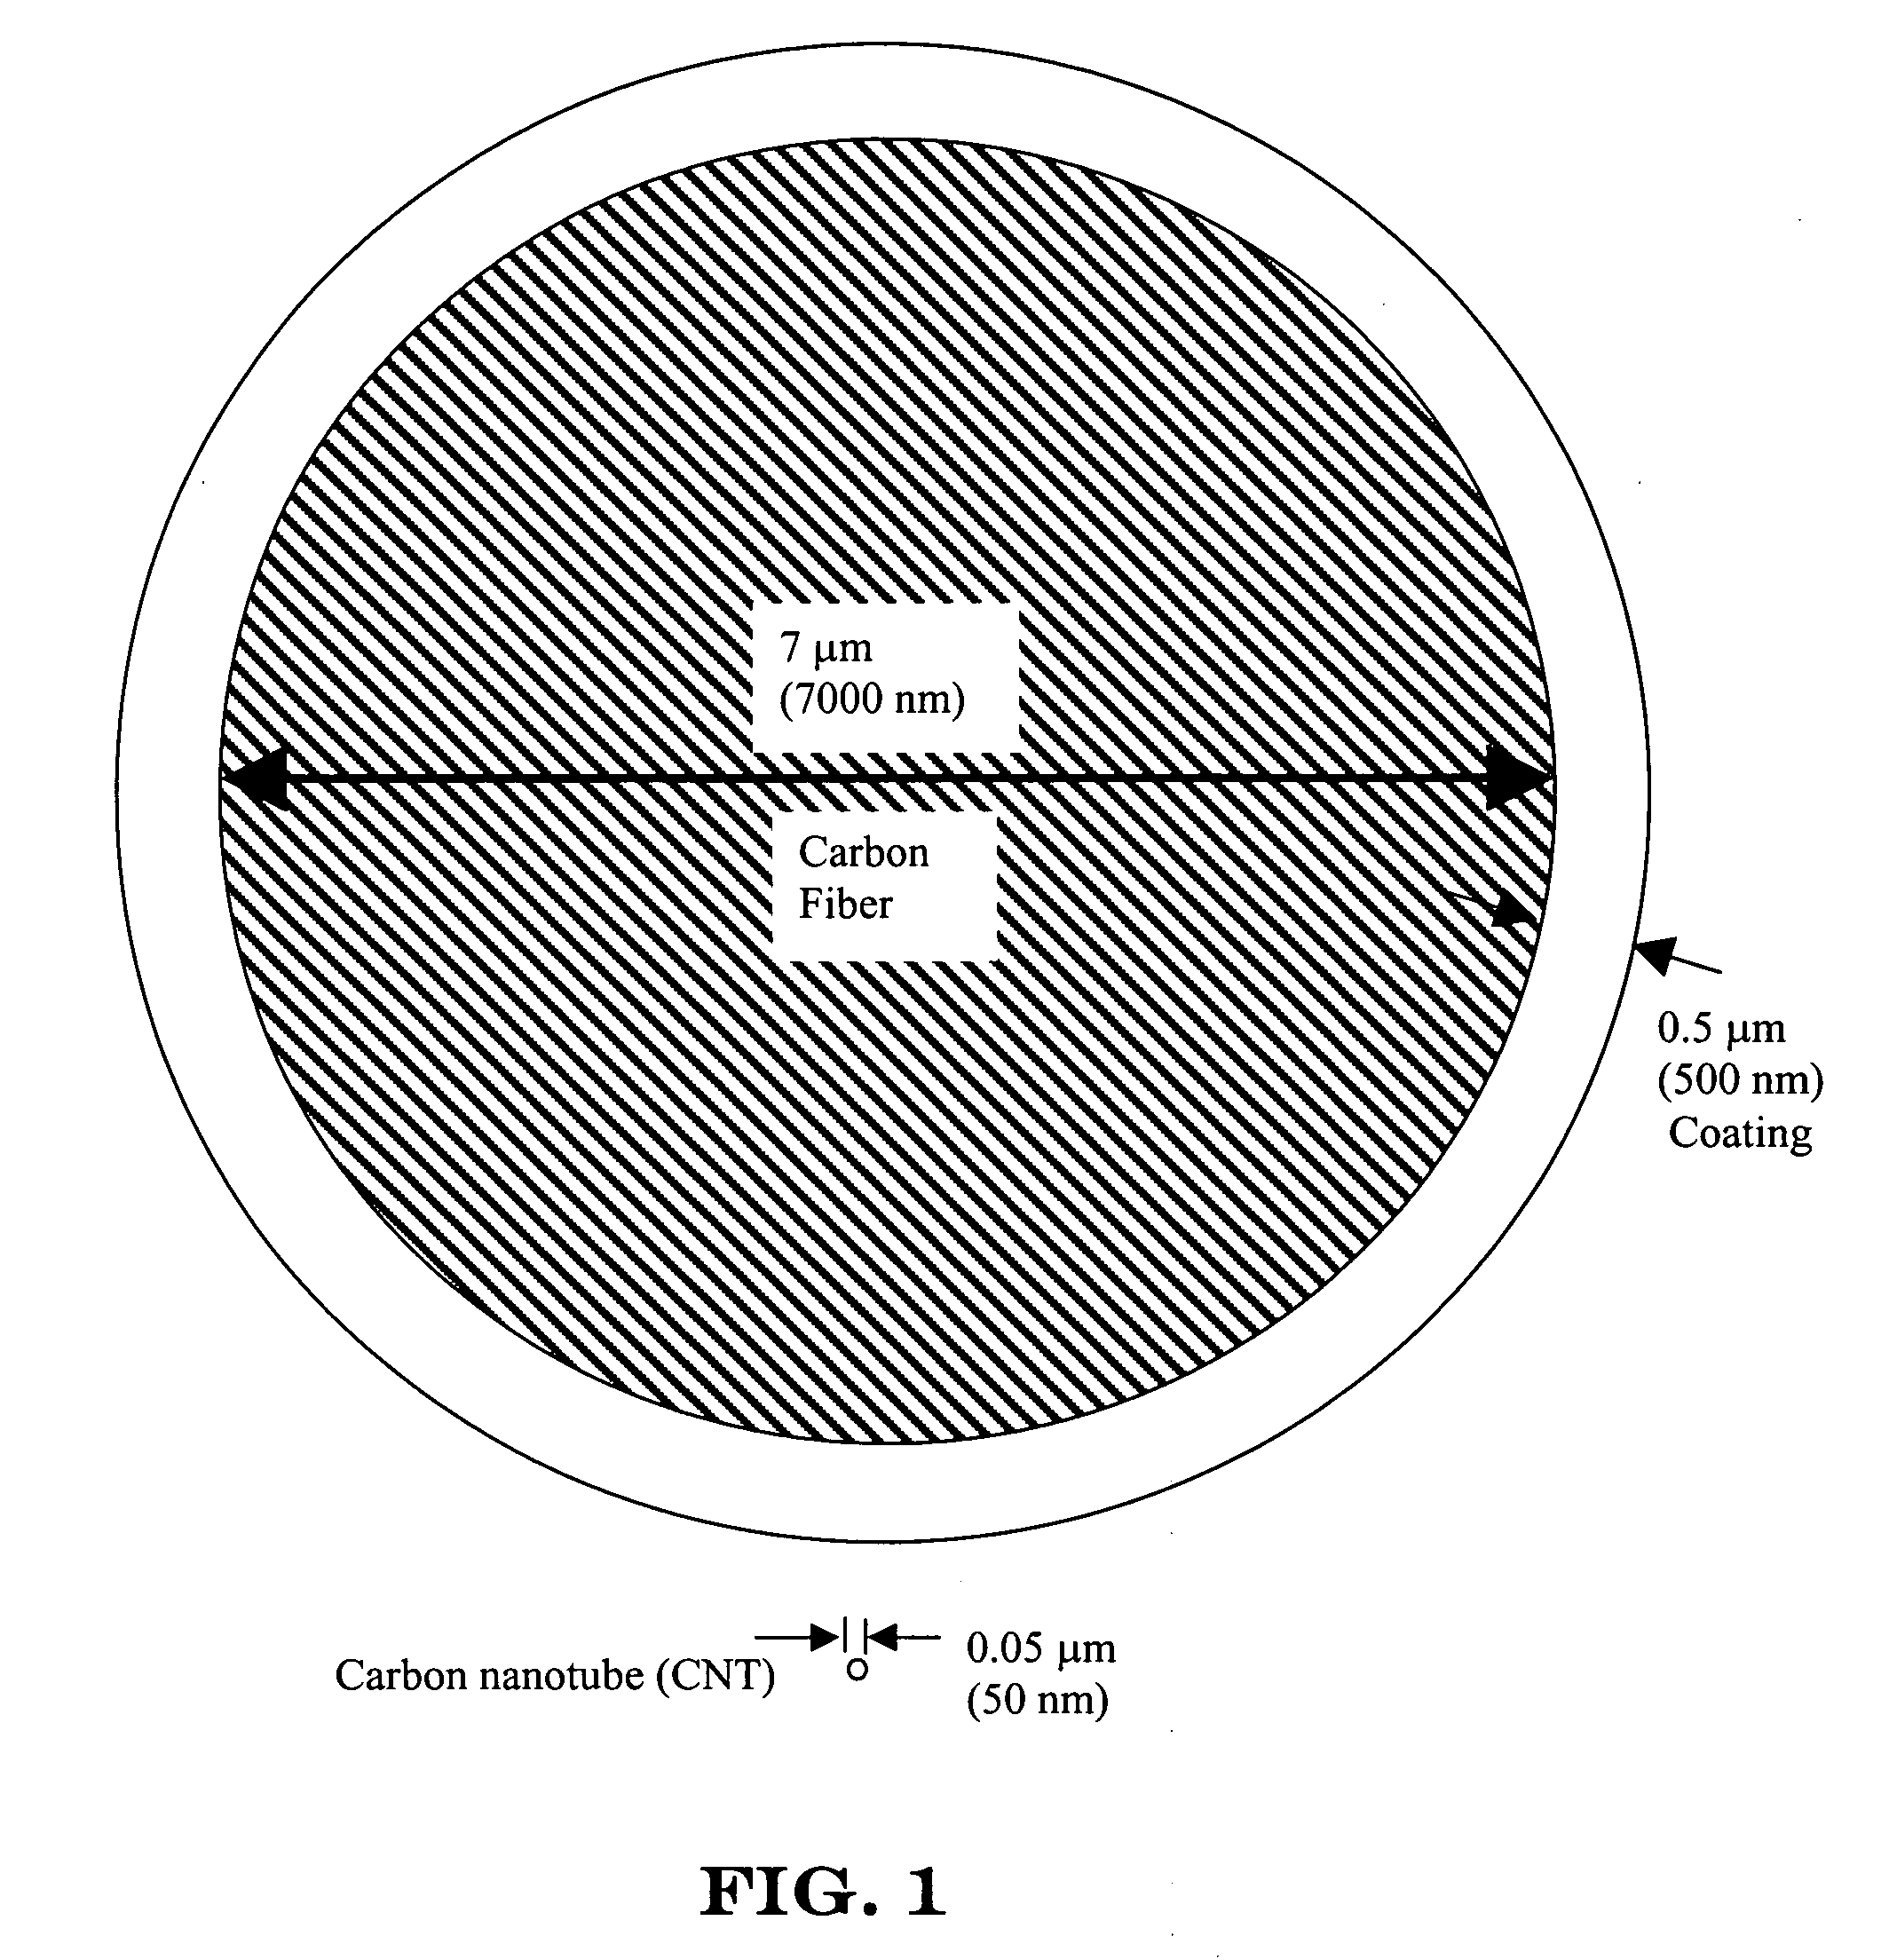 Nanotube-containing composite bodies, and methods for making same